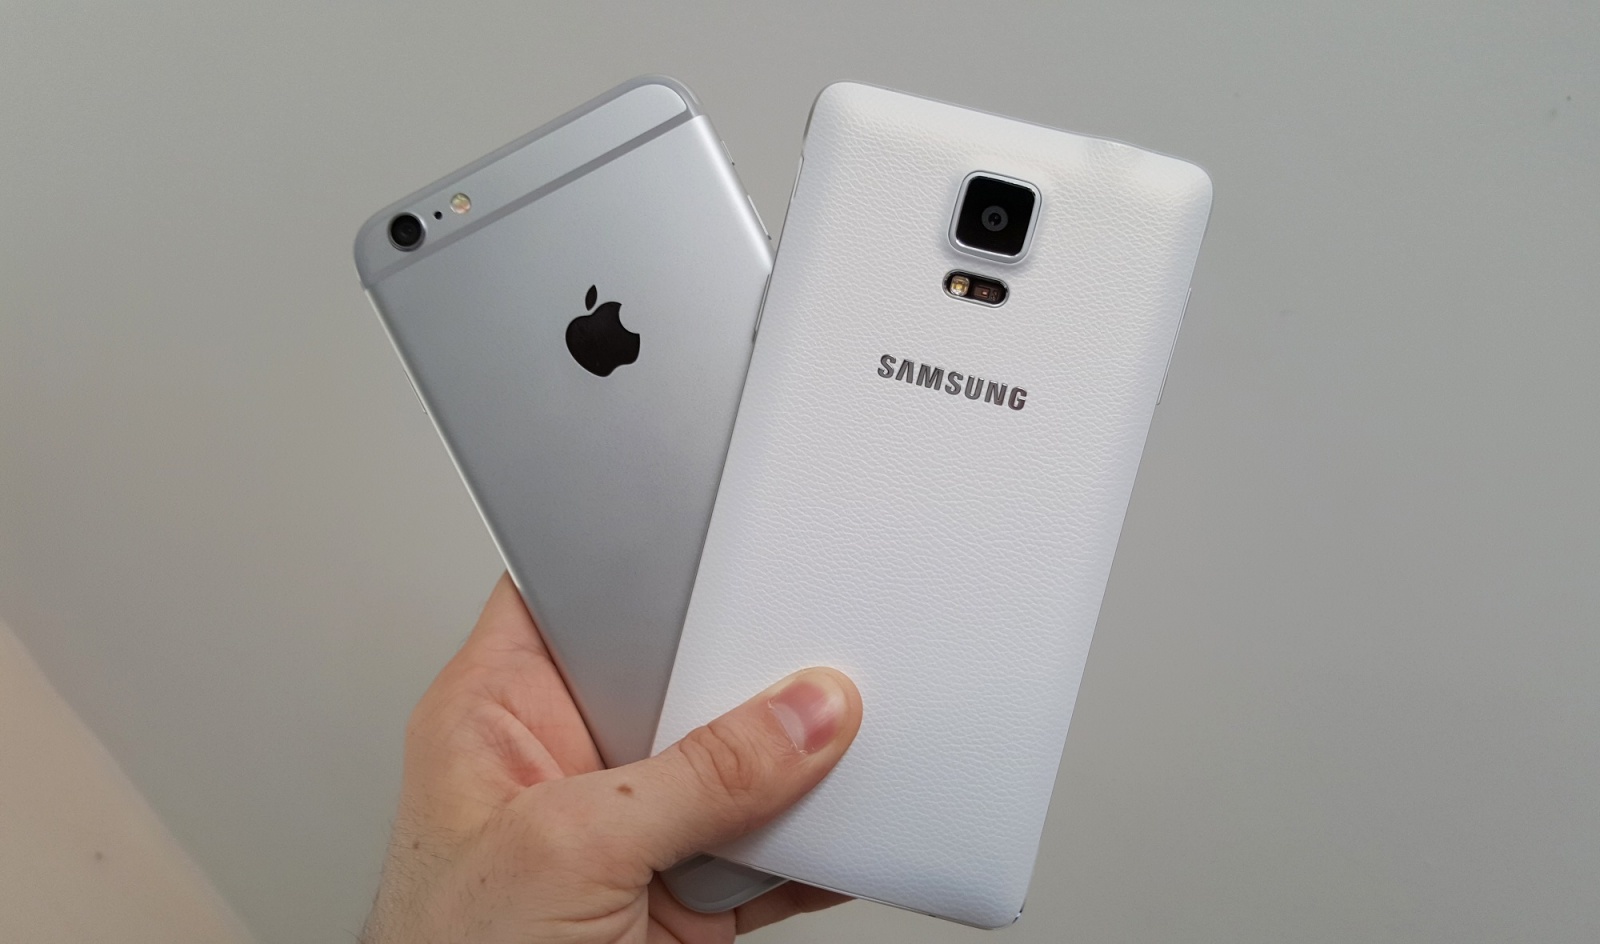 apple-topples-samsung-in-united-arab-emirates-top-brands-list-image-cultofandroidcomwp-contentuploads201504iPhone-6-Plus-vs-Note-4-jpg